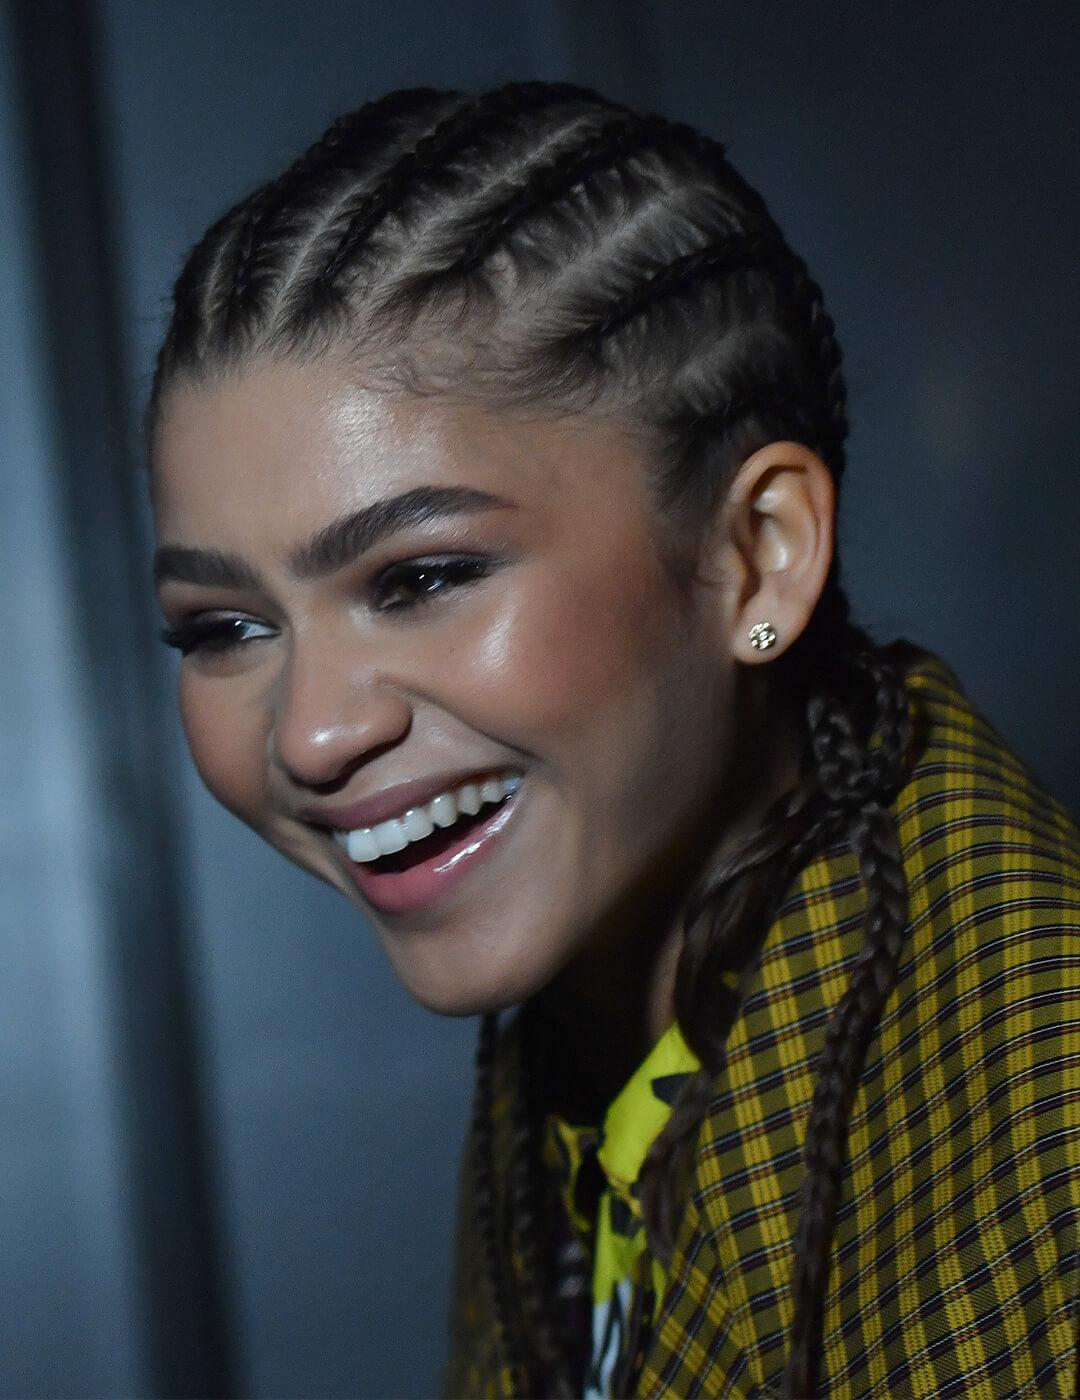 Zendaya in a yellow plaid jacket and classic cornrows hairstyle